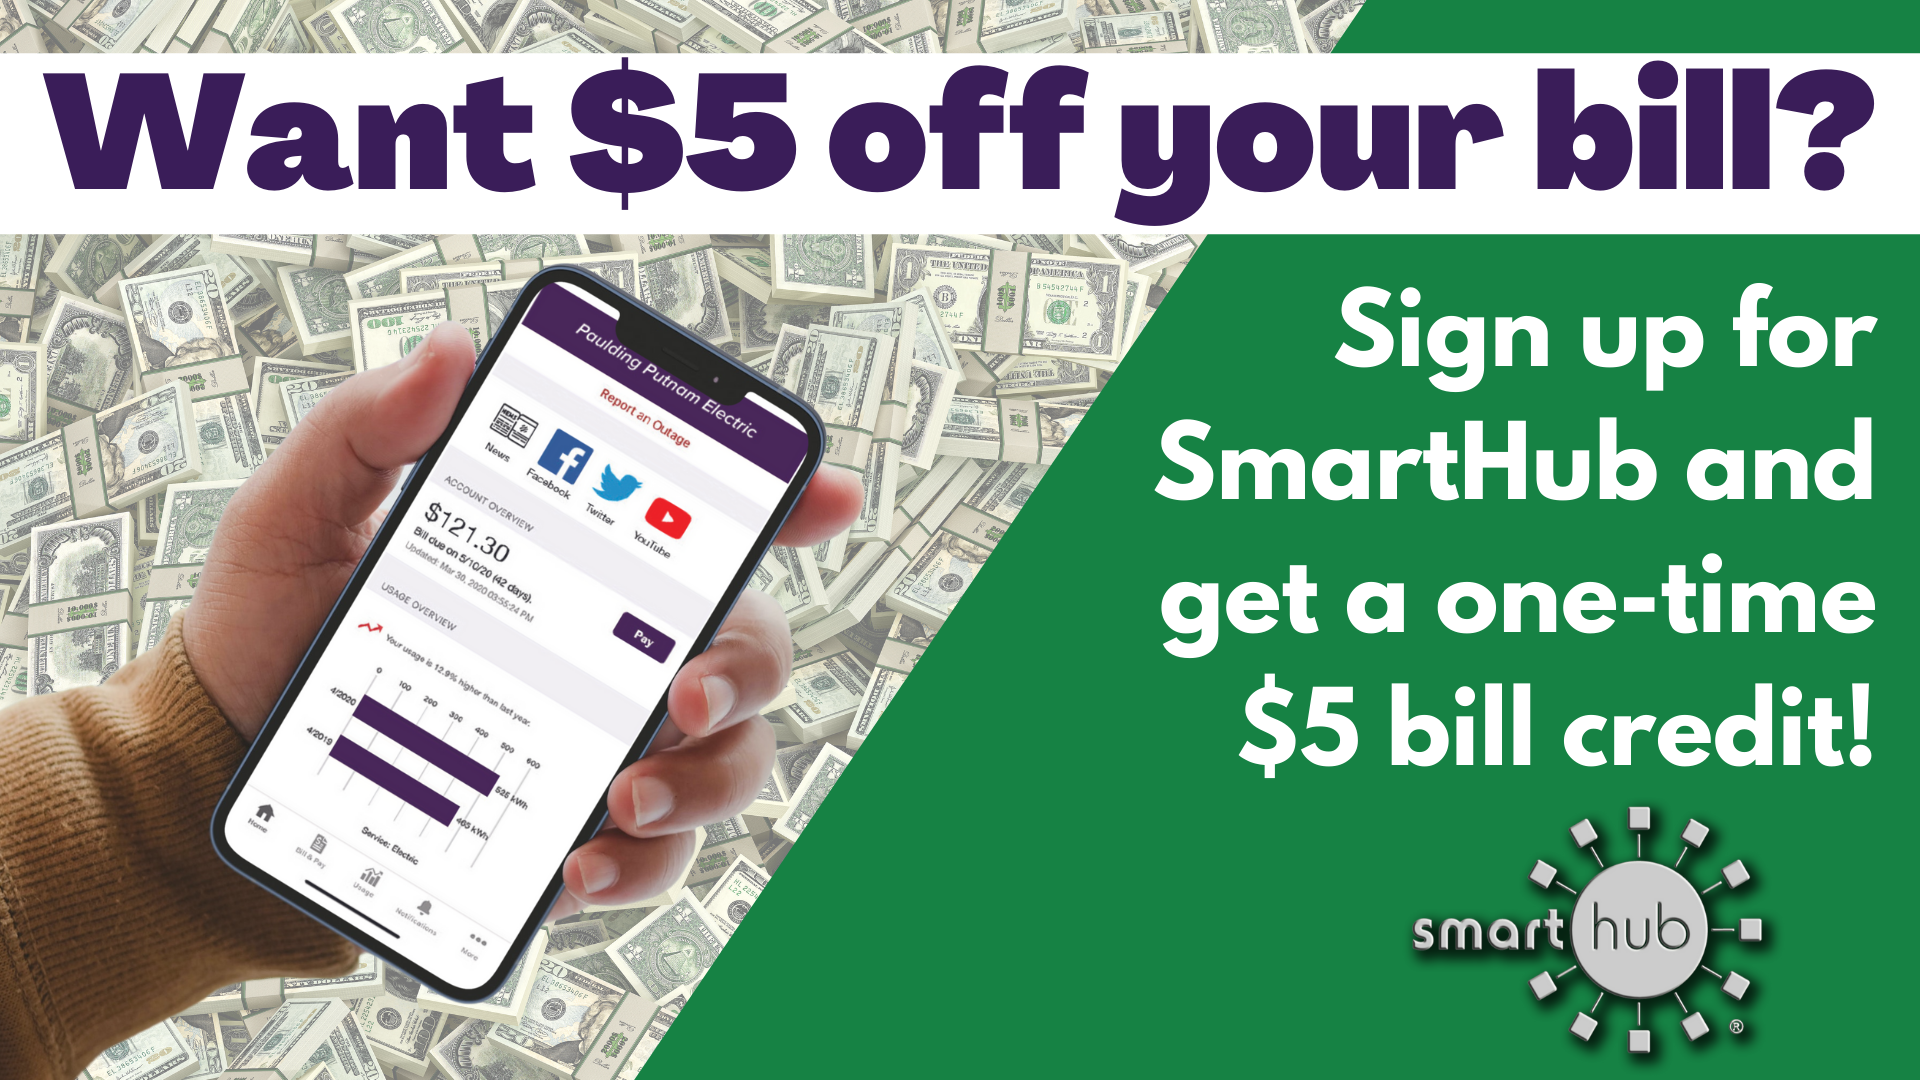 Sign up for SmartHub and get a $5 bill credit!